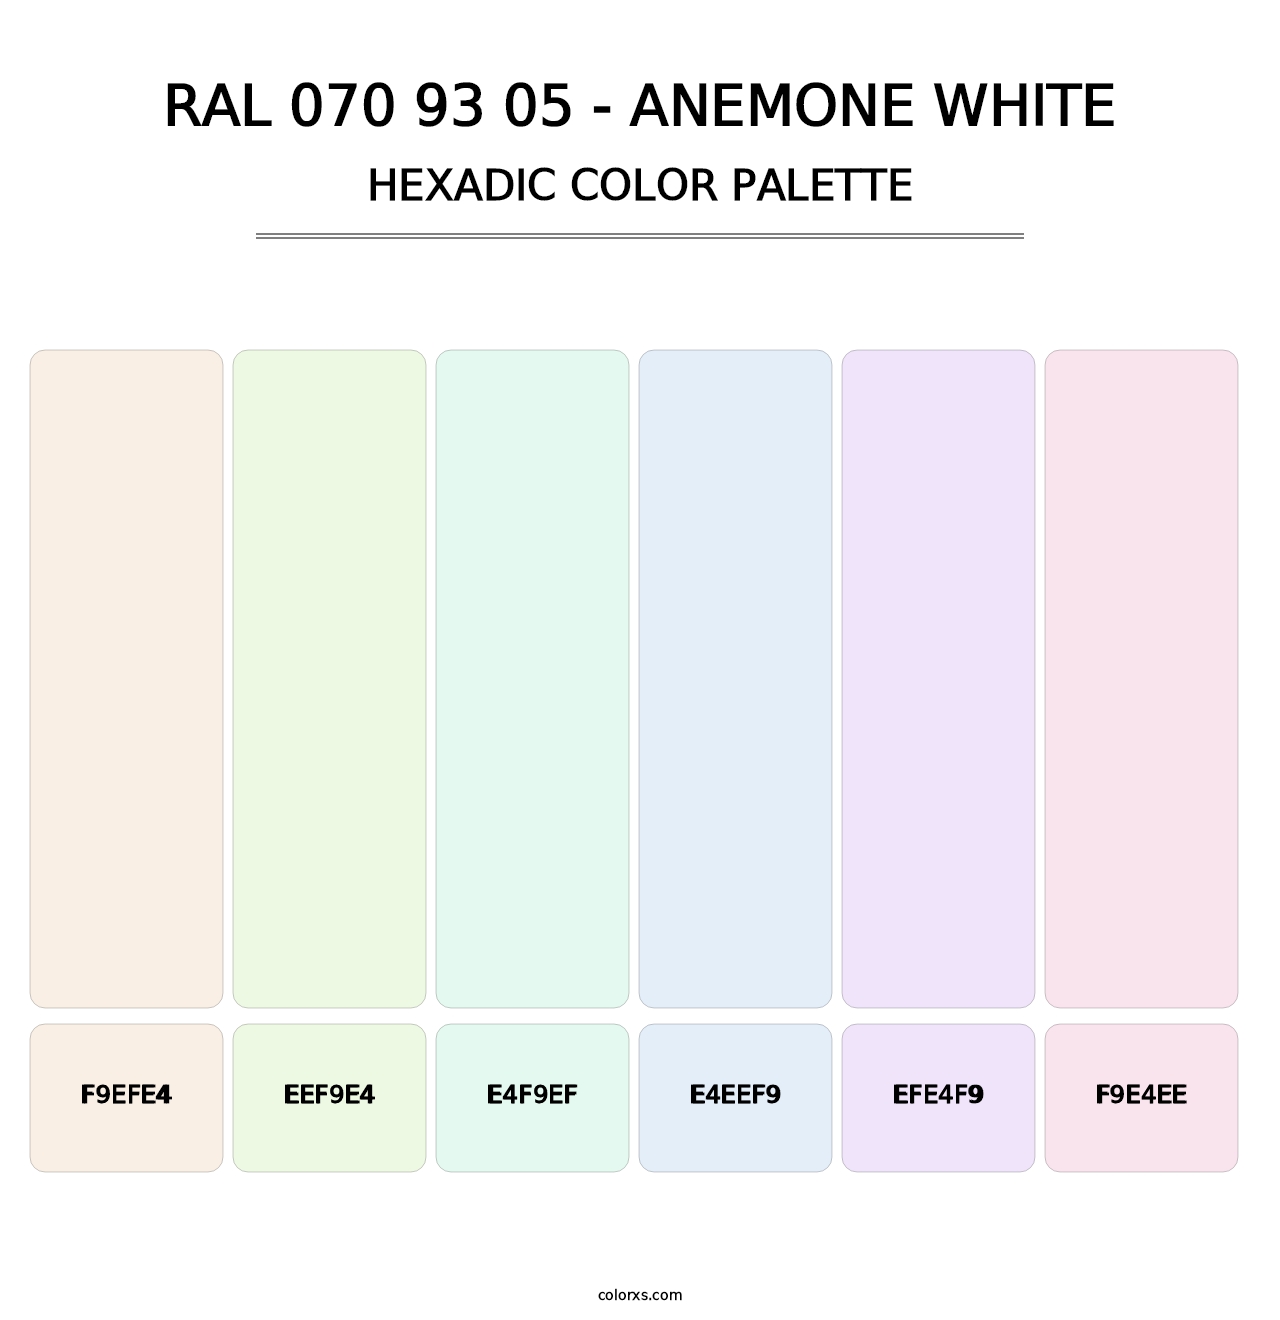 RAL 070 93 05 - Anemone White - Hexadic Color Palette